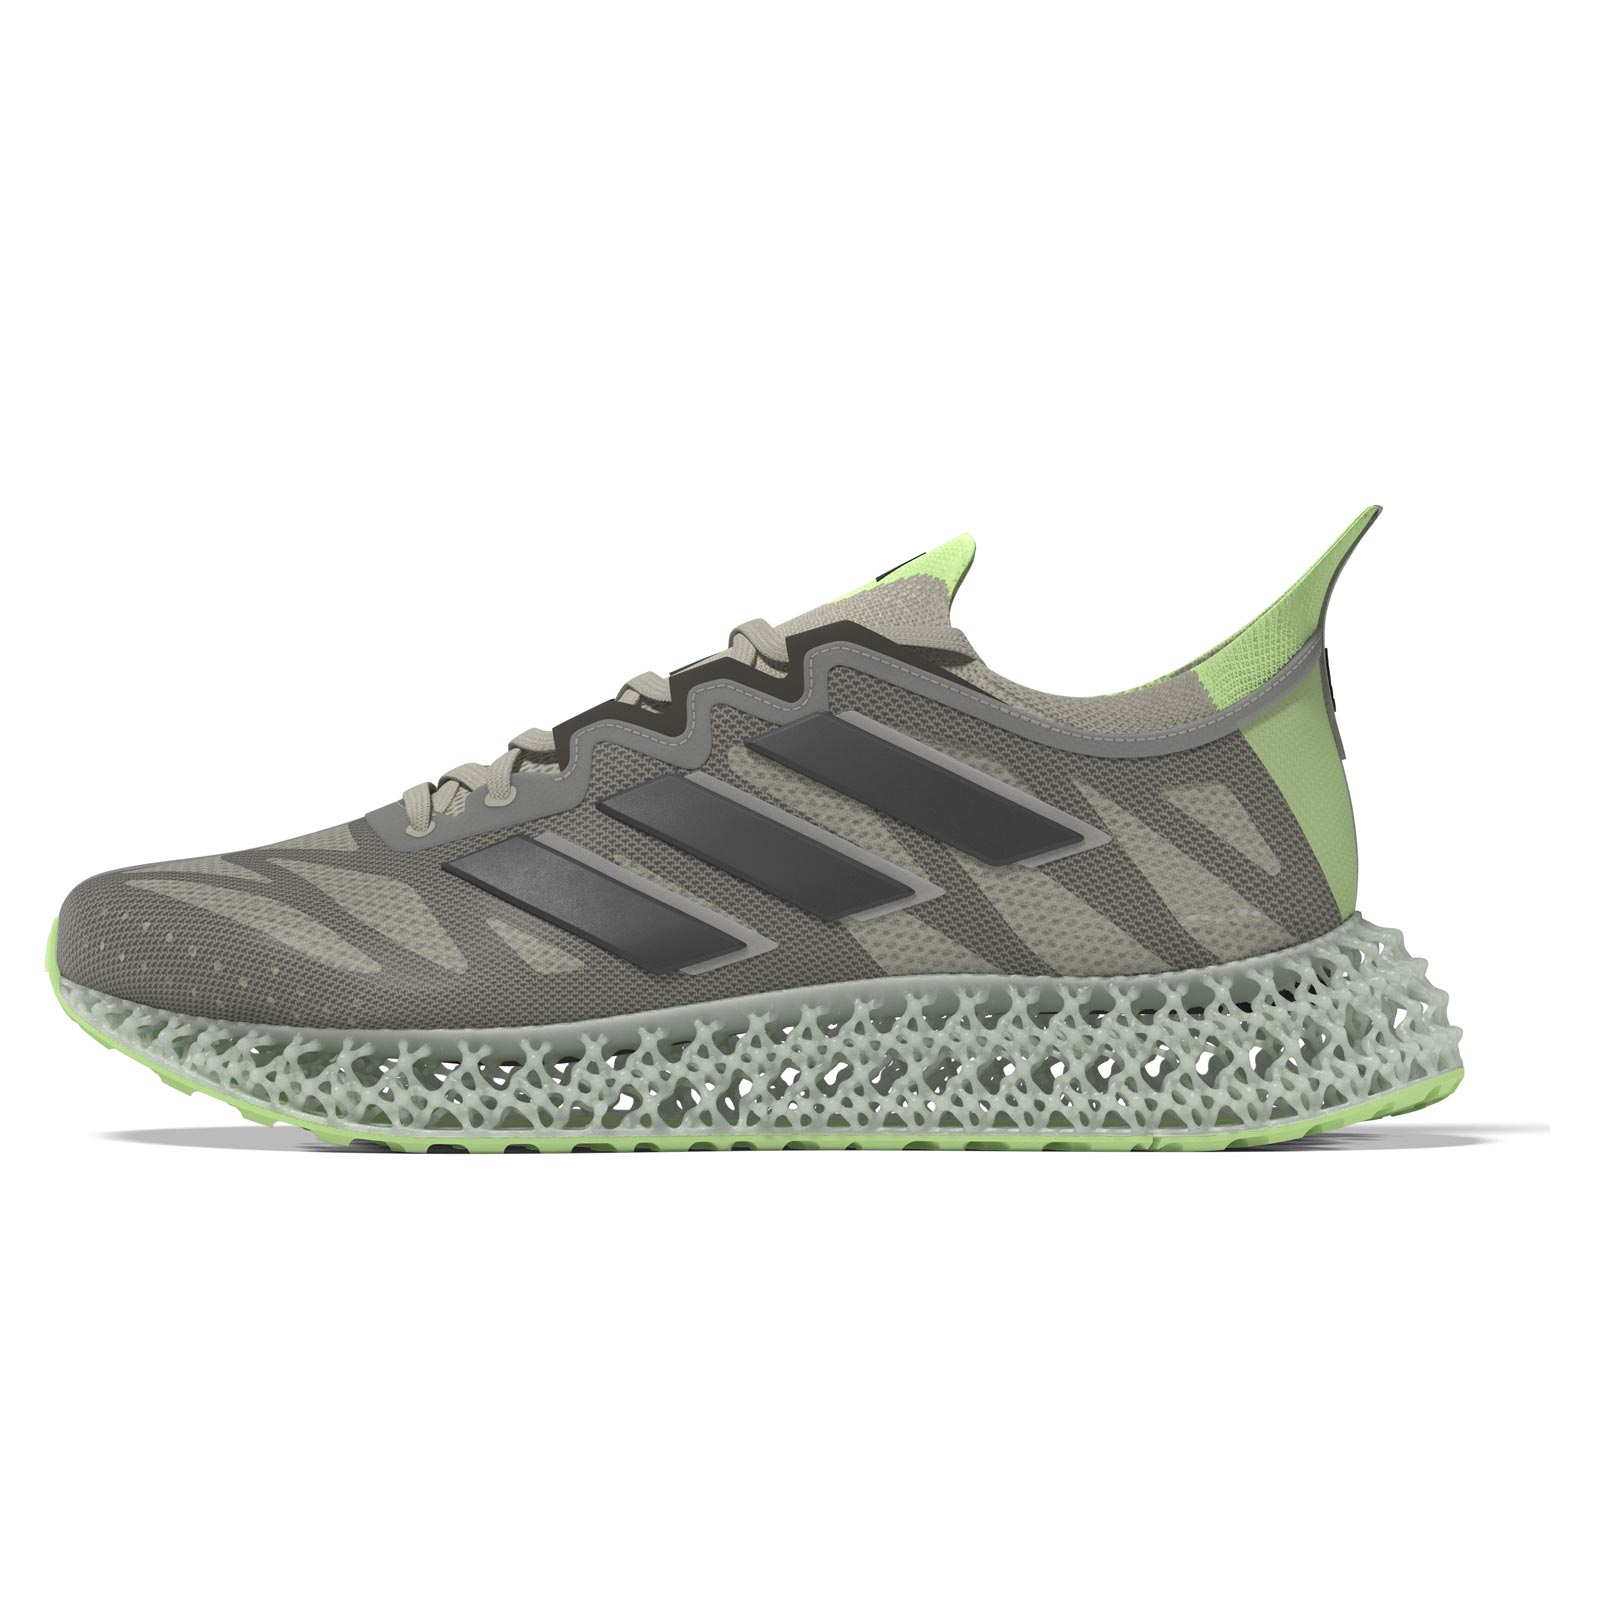 adidas 4DFWD 3 Mens Running Shoes